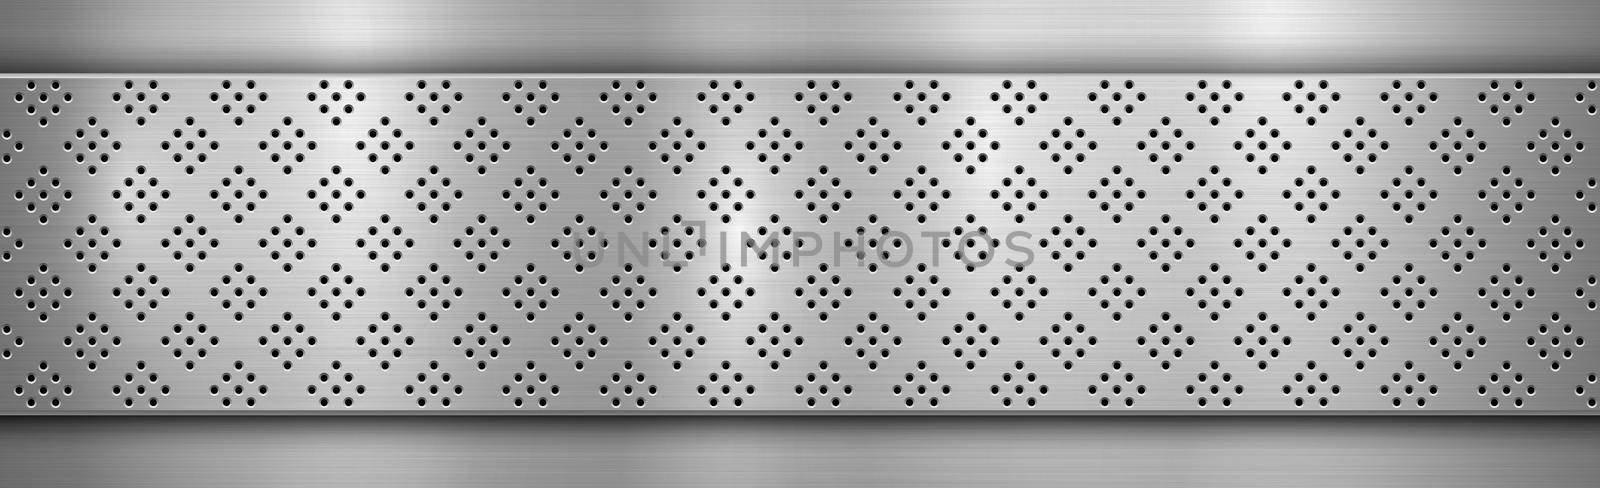 Texture panorama of metal with reflection with perforation by BEMPhoto